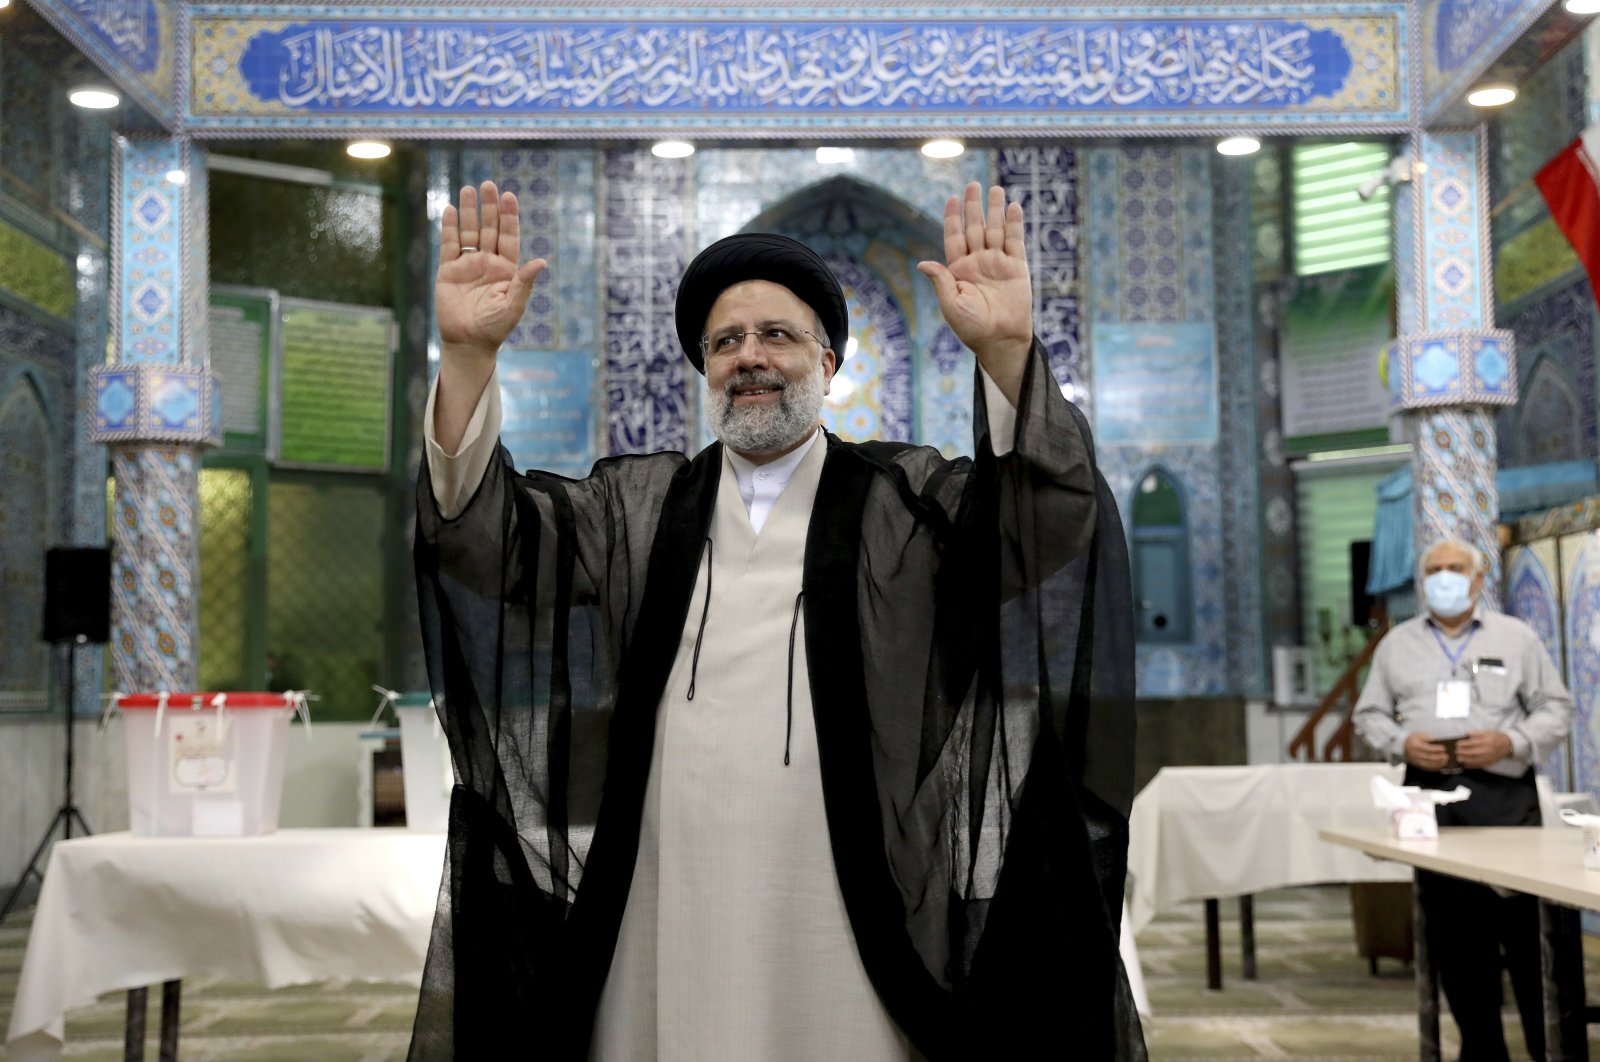 Ebrahim Raisi, a candidate in Iran's presidential elections waves to the media after casting his vote at a polling station in Tehran, Iran, June 18, 2021. (AP Photo)